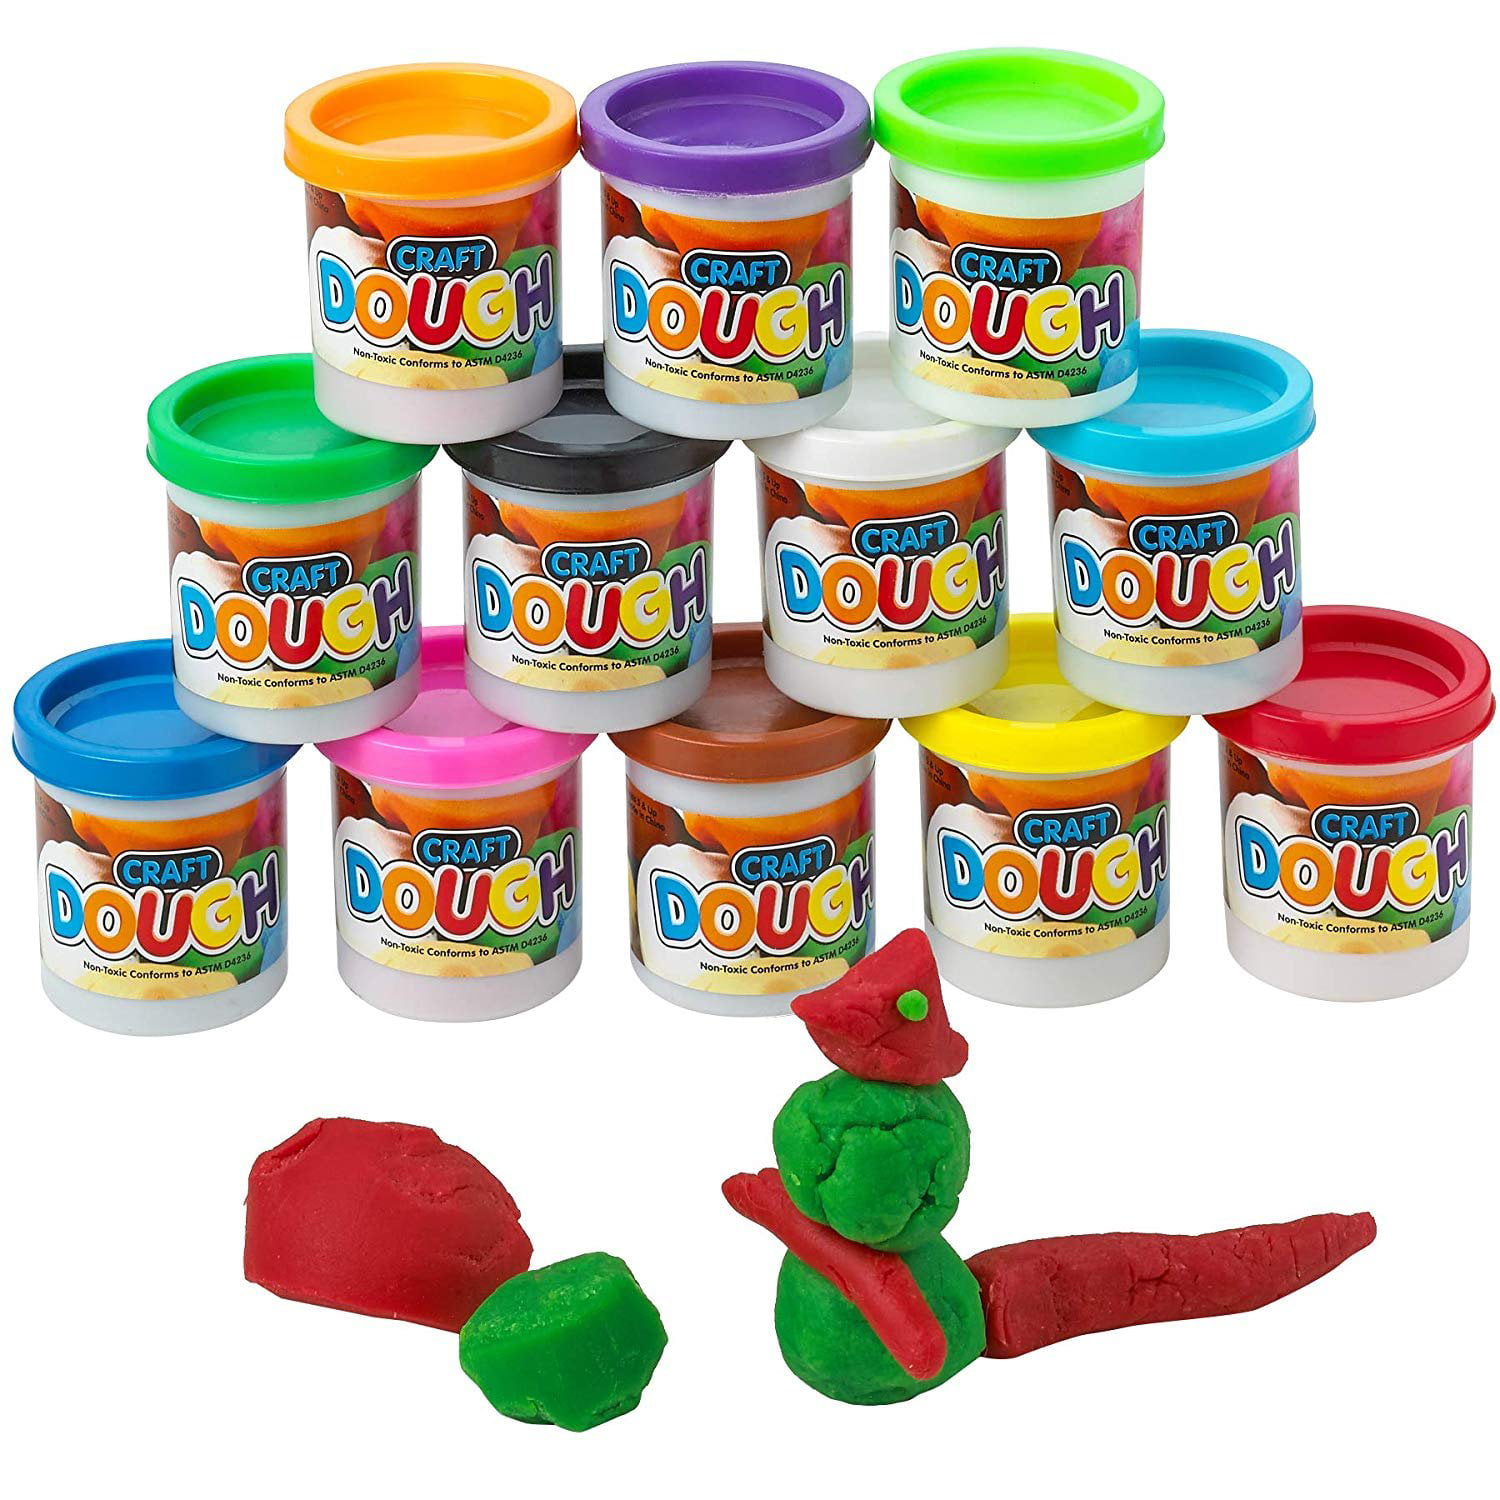 Fashionclubs 6pcs/set Plastic Art Clay and Dough Playing Tools Set for Children Ages 3 and Up